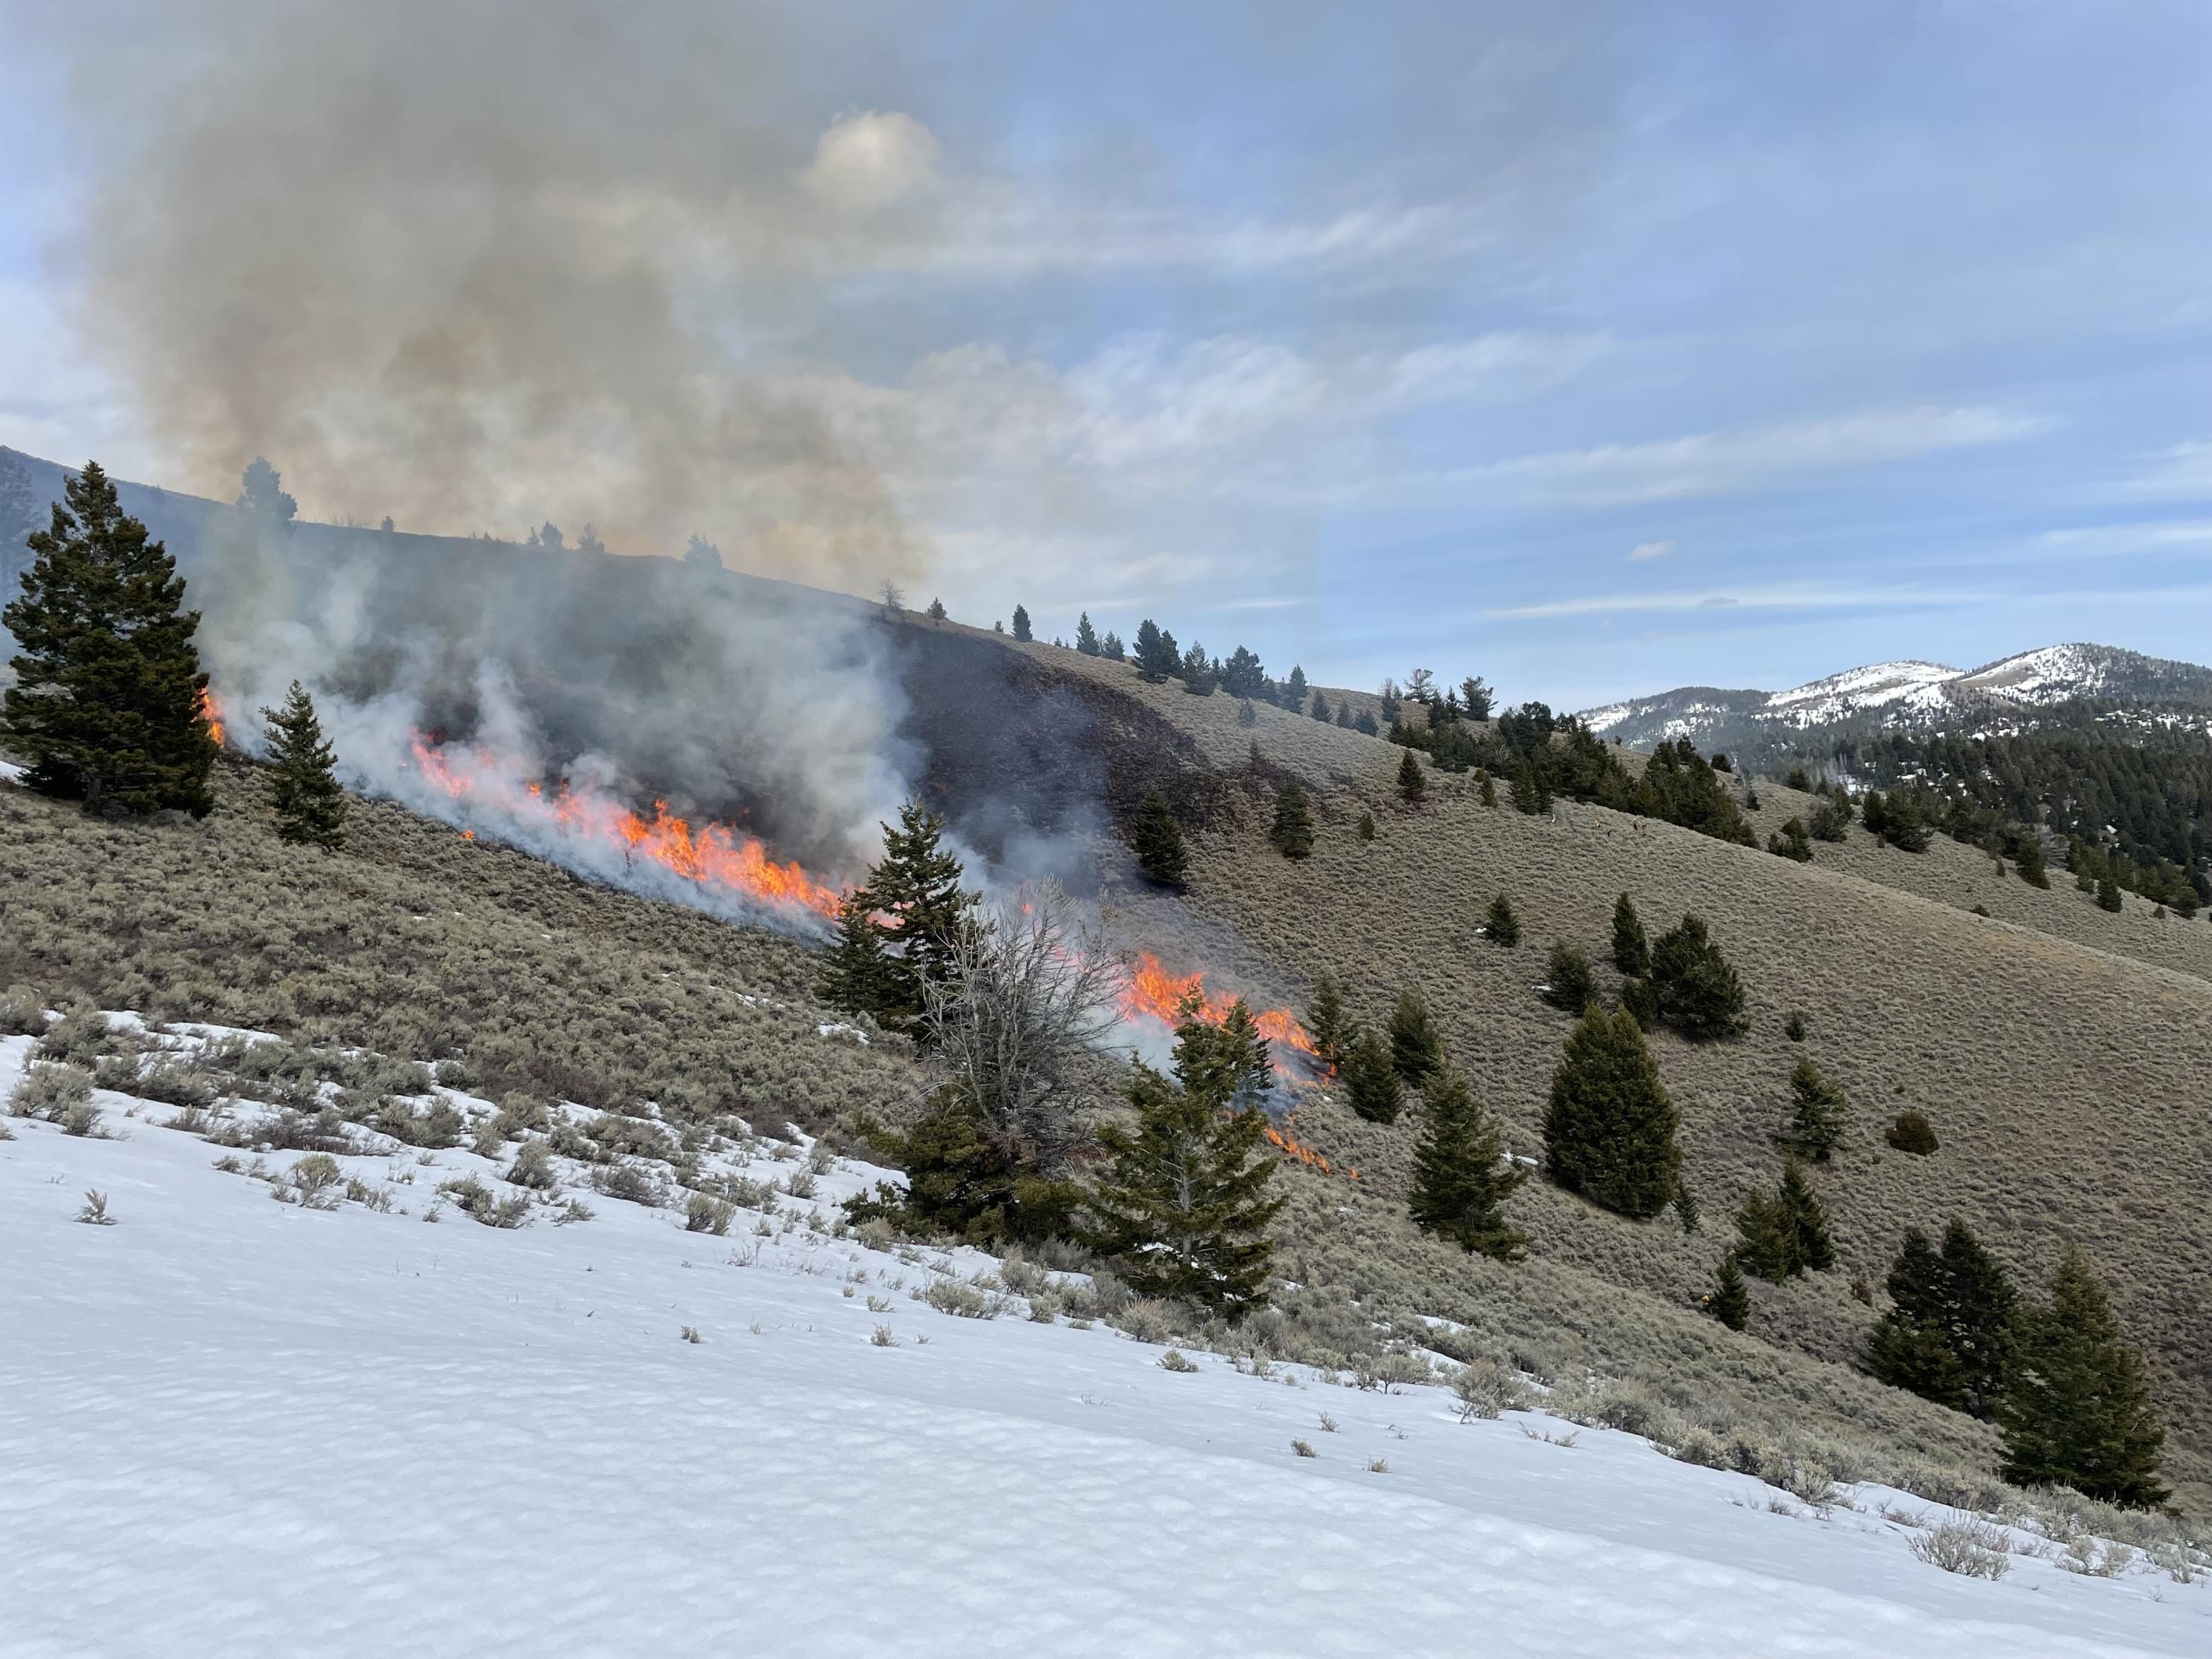 Picture showing prescribed fire operations and burning fuels, adjacent to the unit boundary covered by snow.